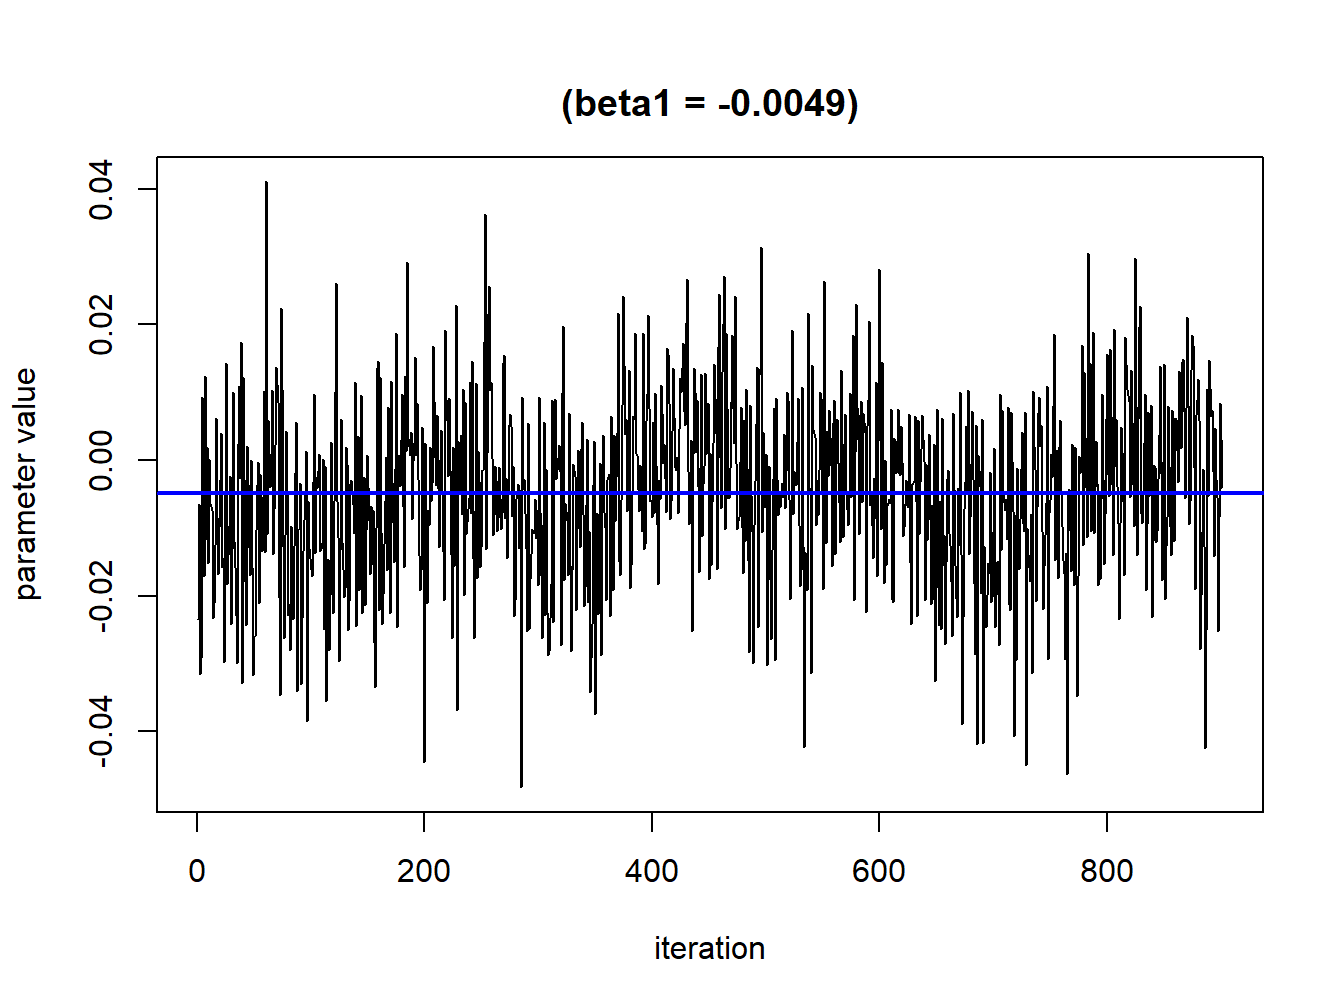 Convergence plot for a single parameter after burning phase exclusion